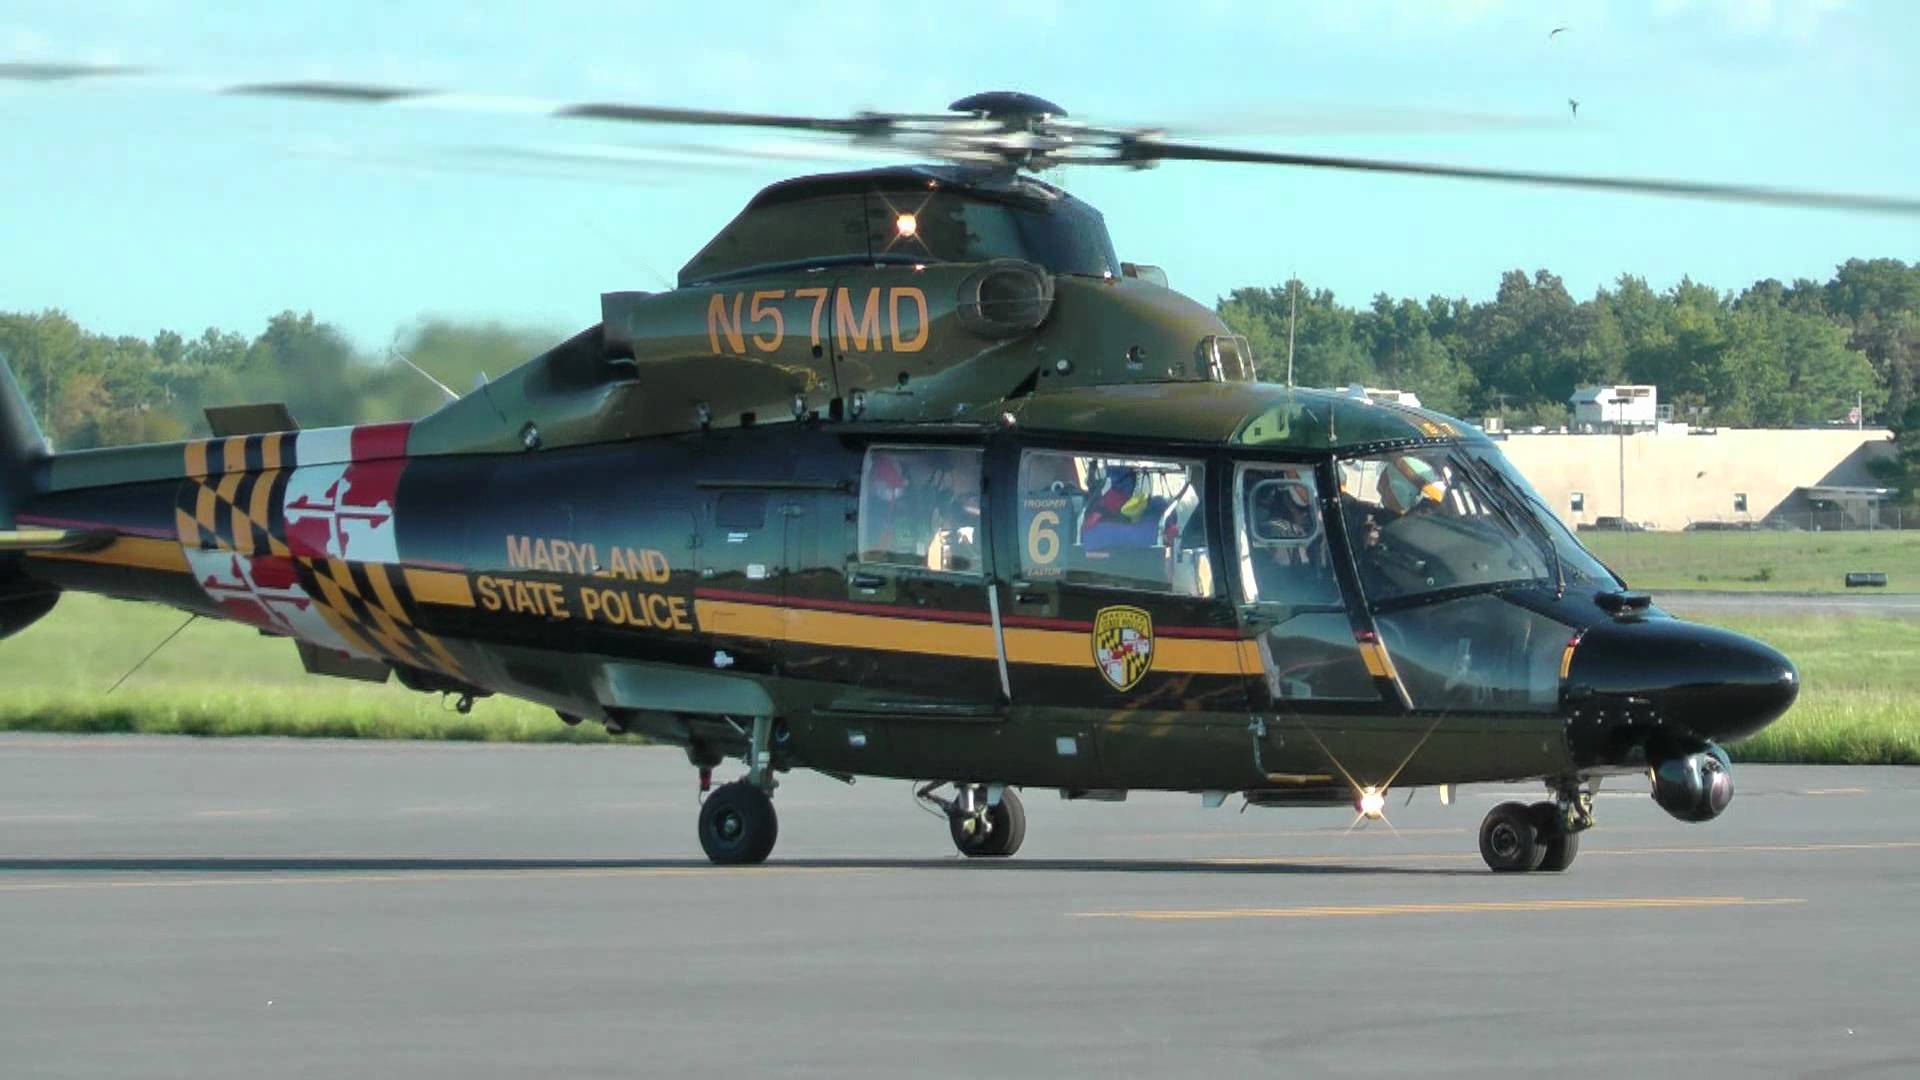 Maryland State Police Helicopter Aerospatiale Dauphine at Easton, Md ...